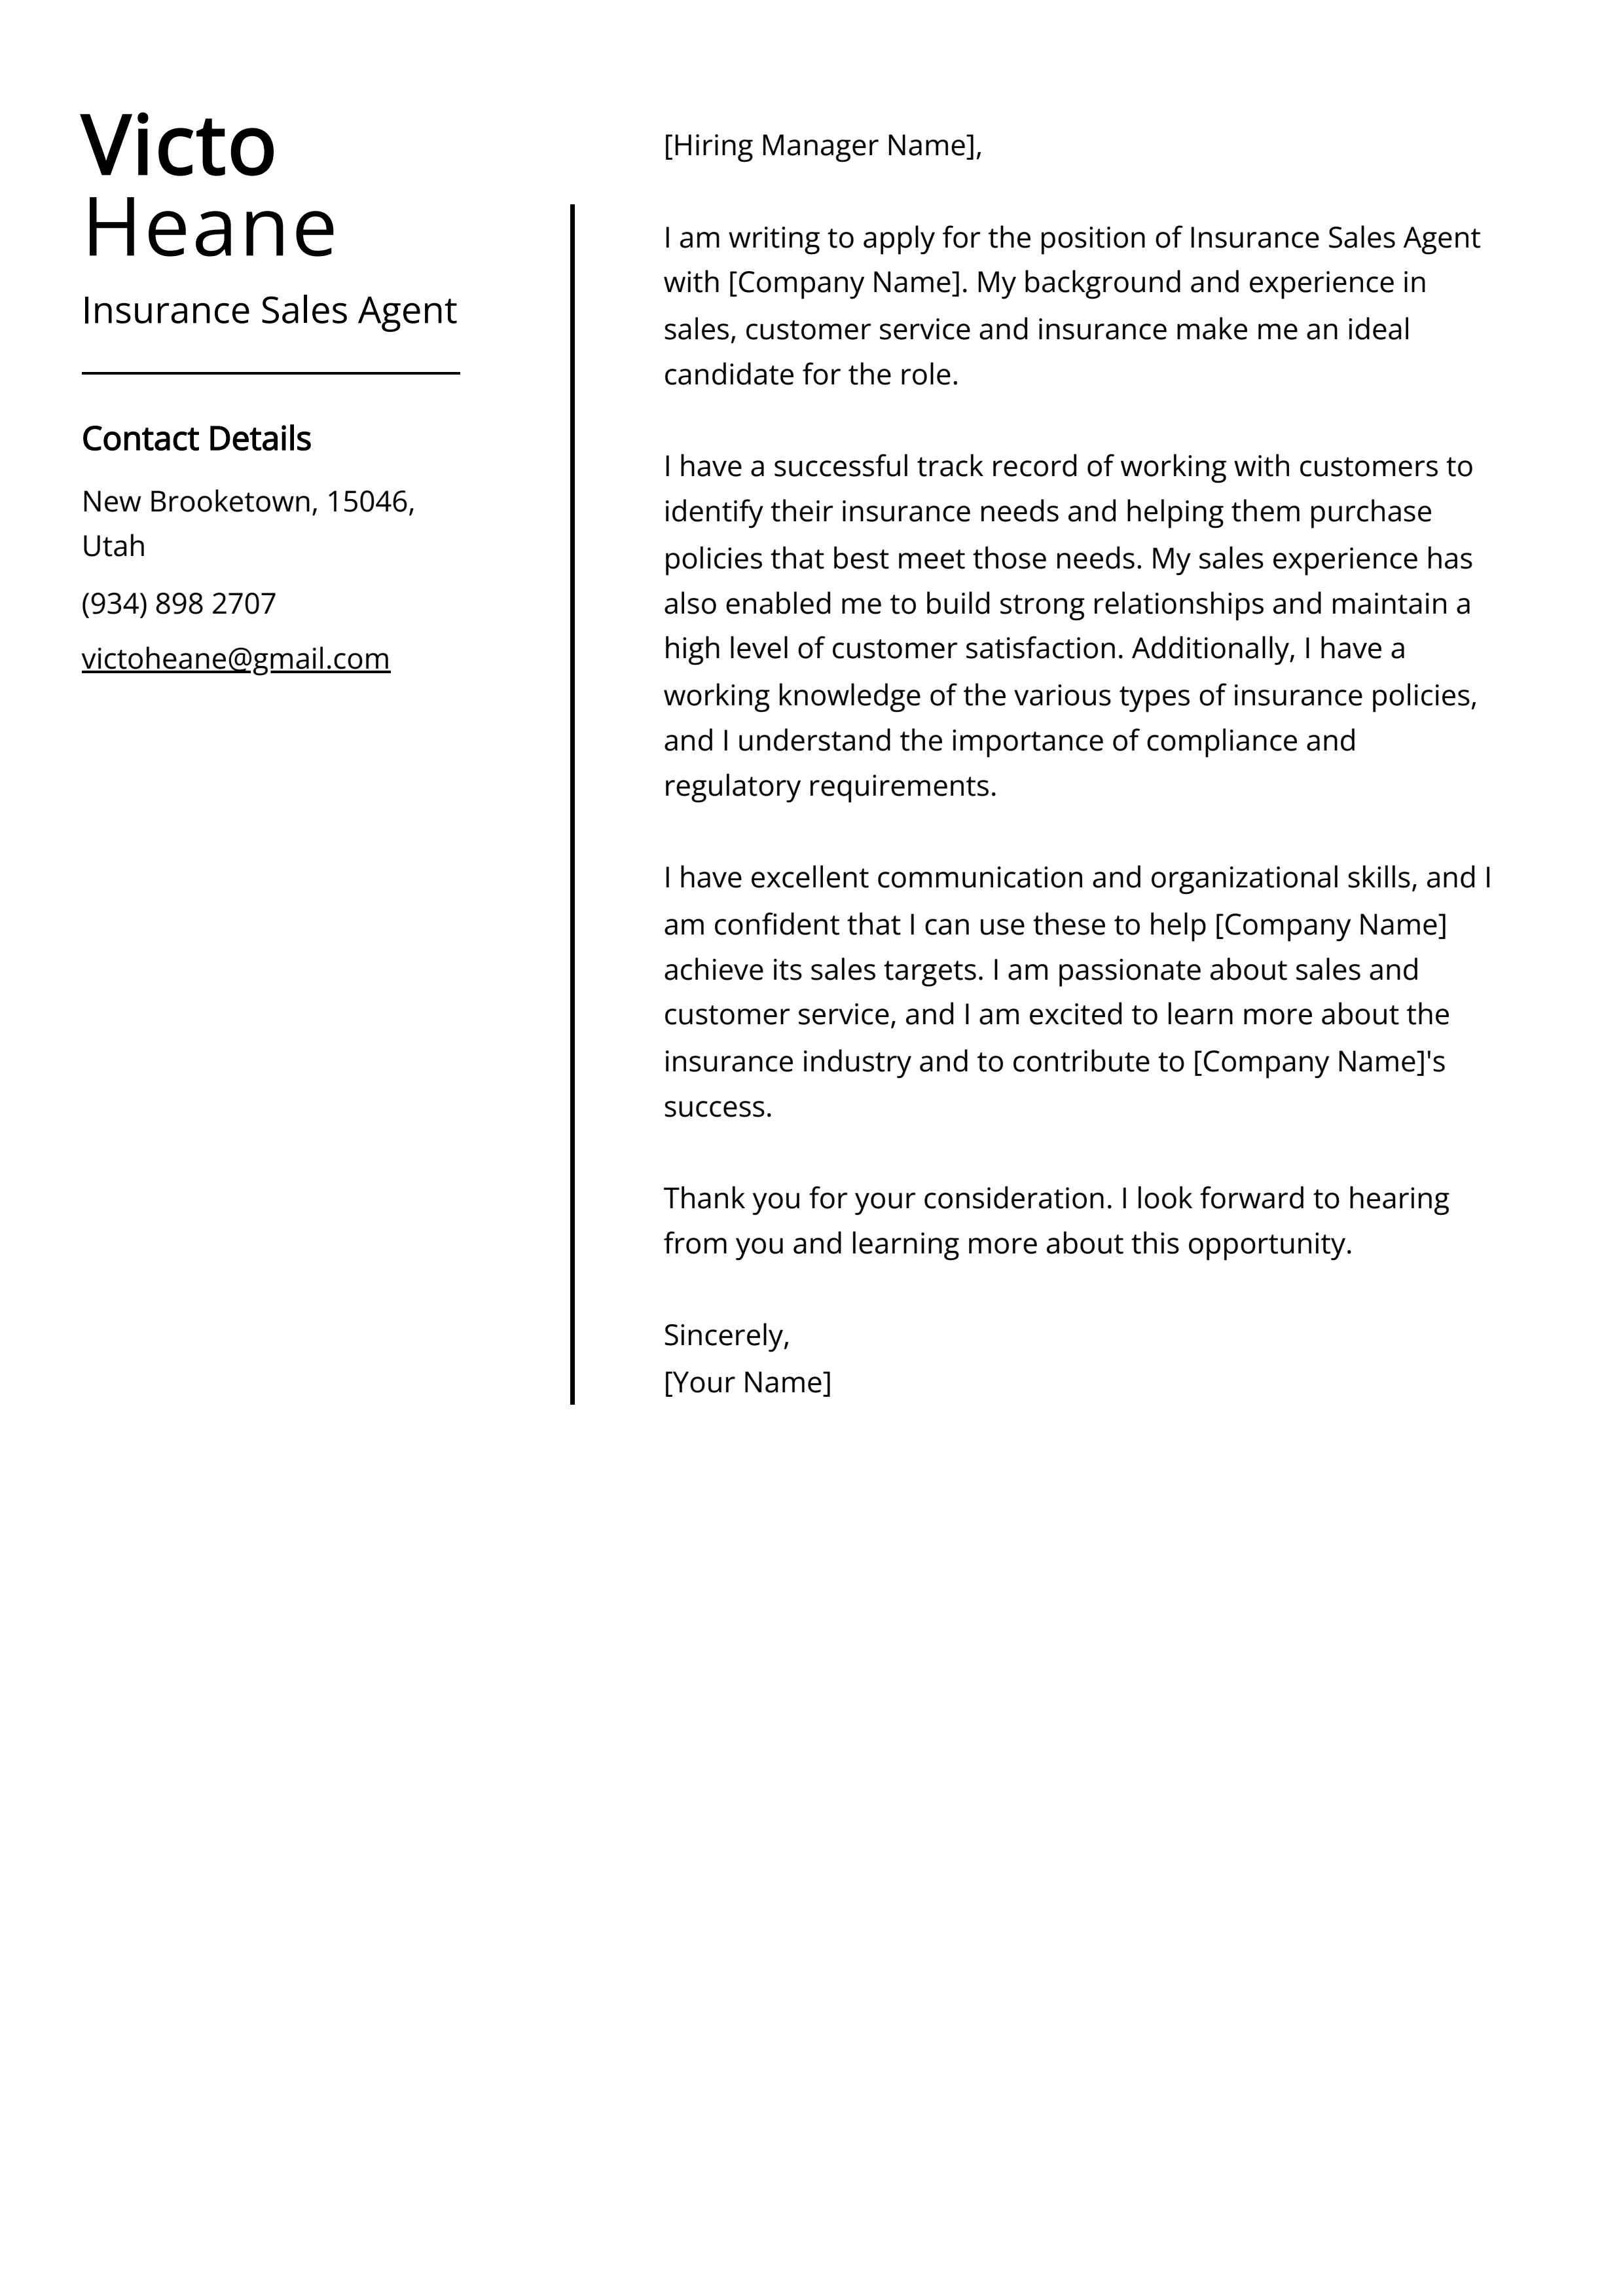 Experienced Insurance Sales Agent Cover Letter Example